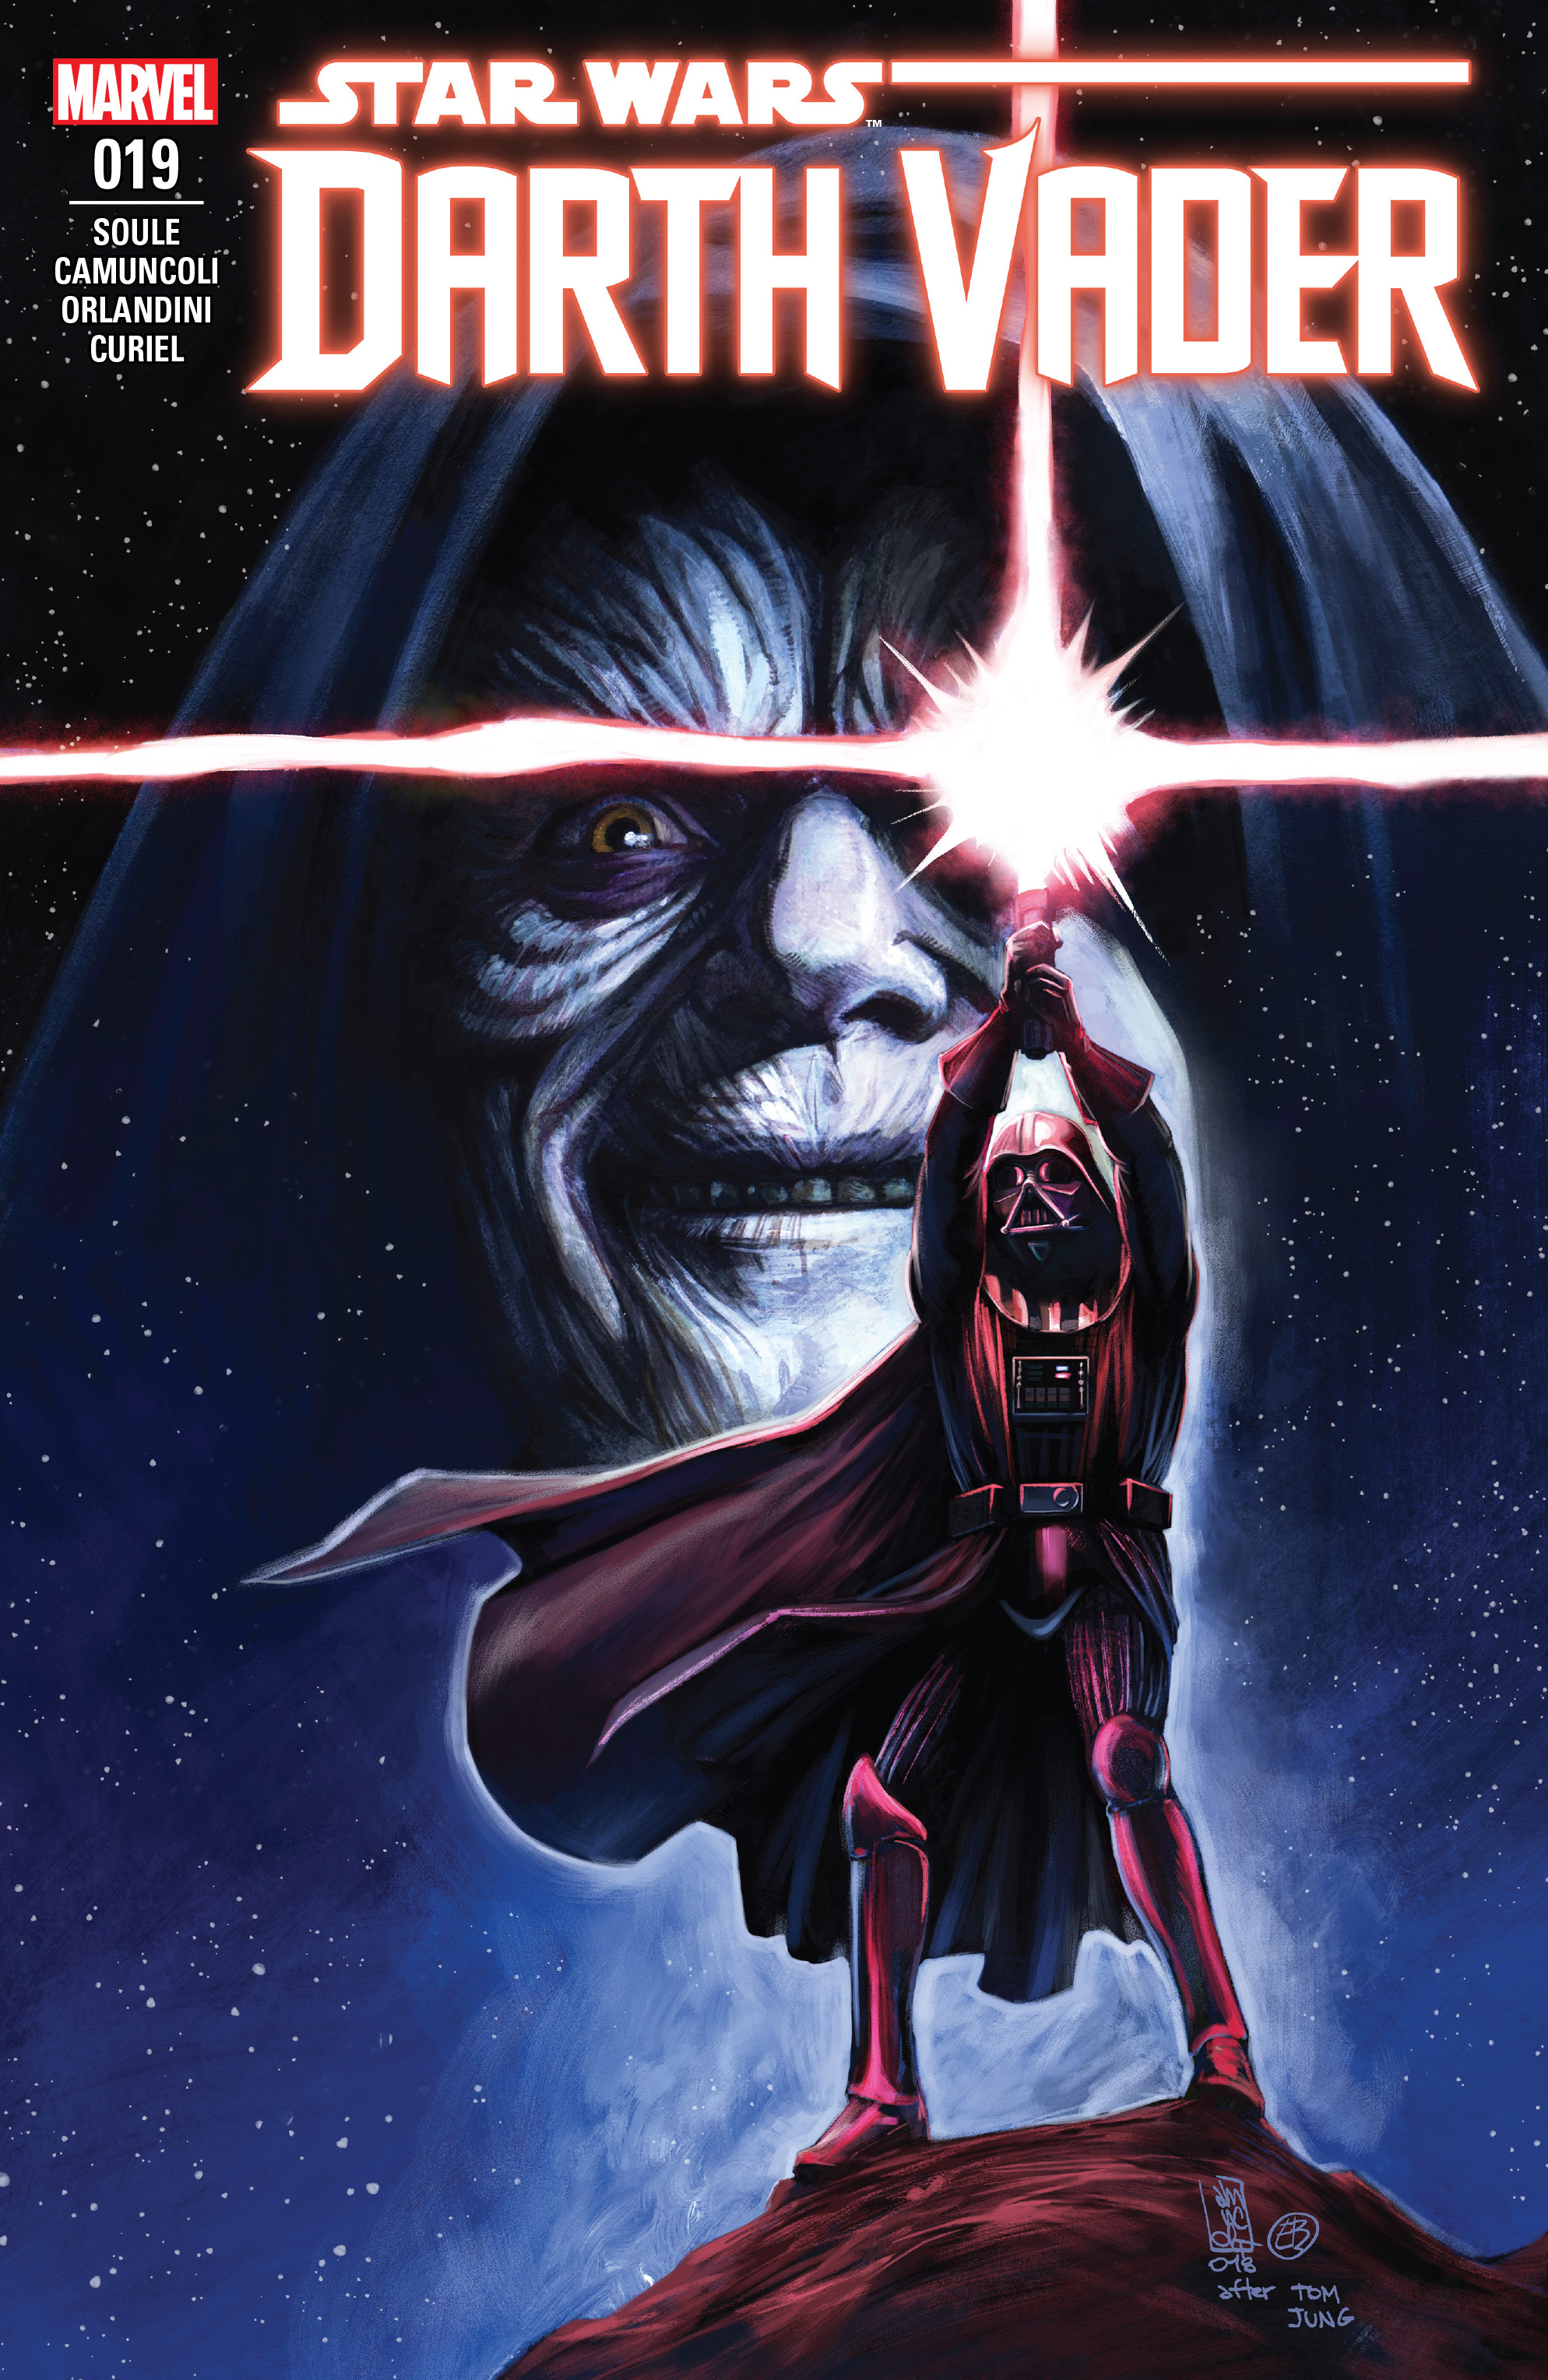 Darth Vader Dark Lord Of The Sith 19 Fortress Vader Part I Wookieepedia Fandom Powered By